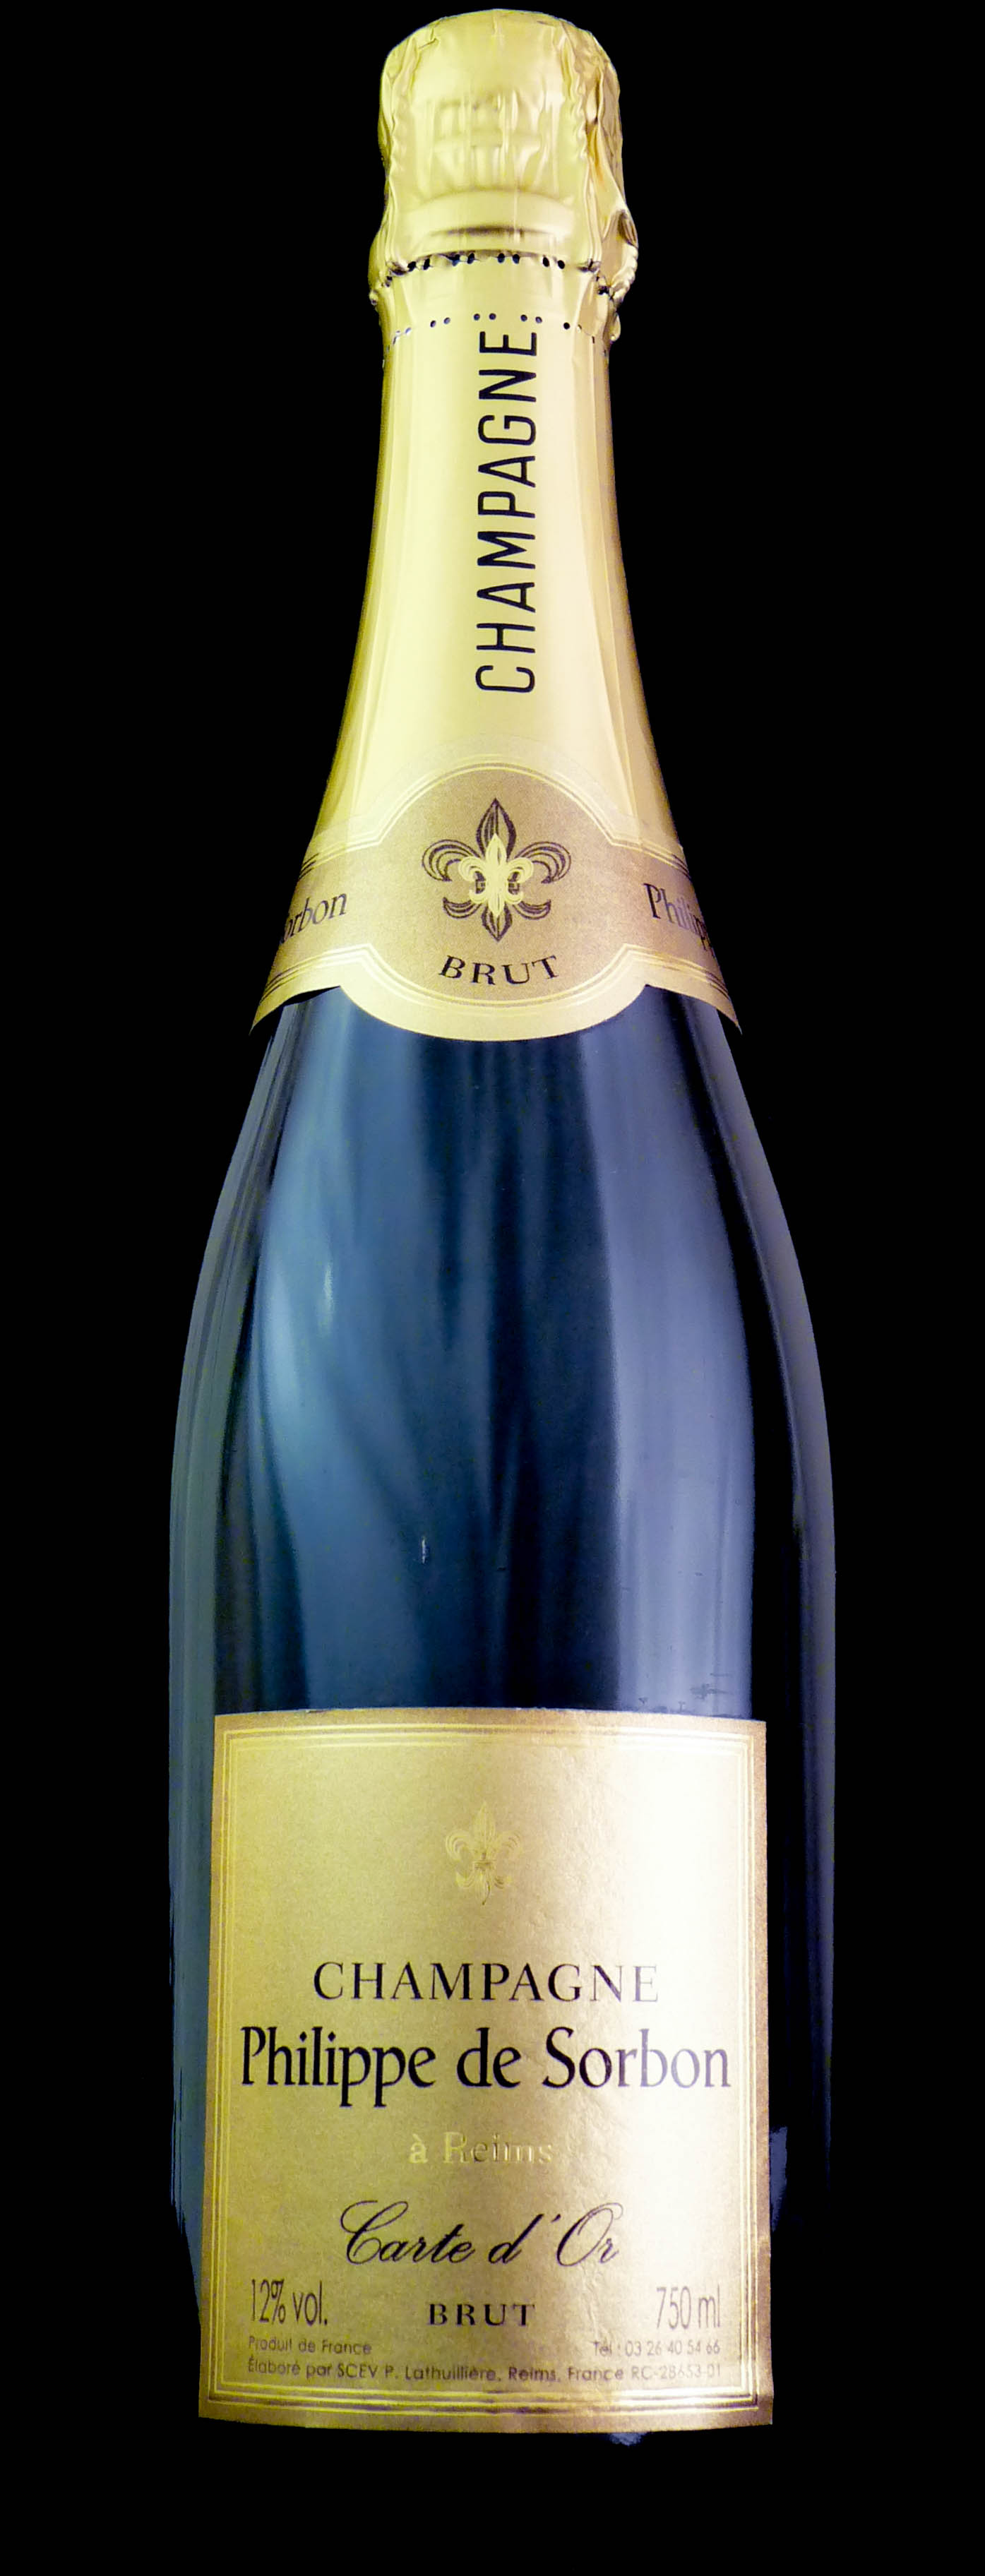 picture of the champagne bottle